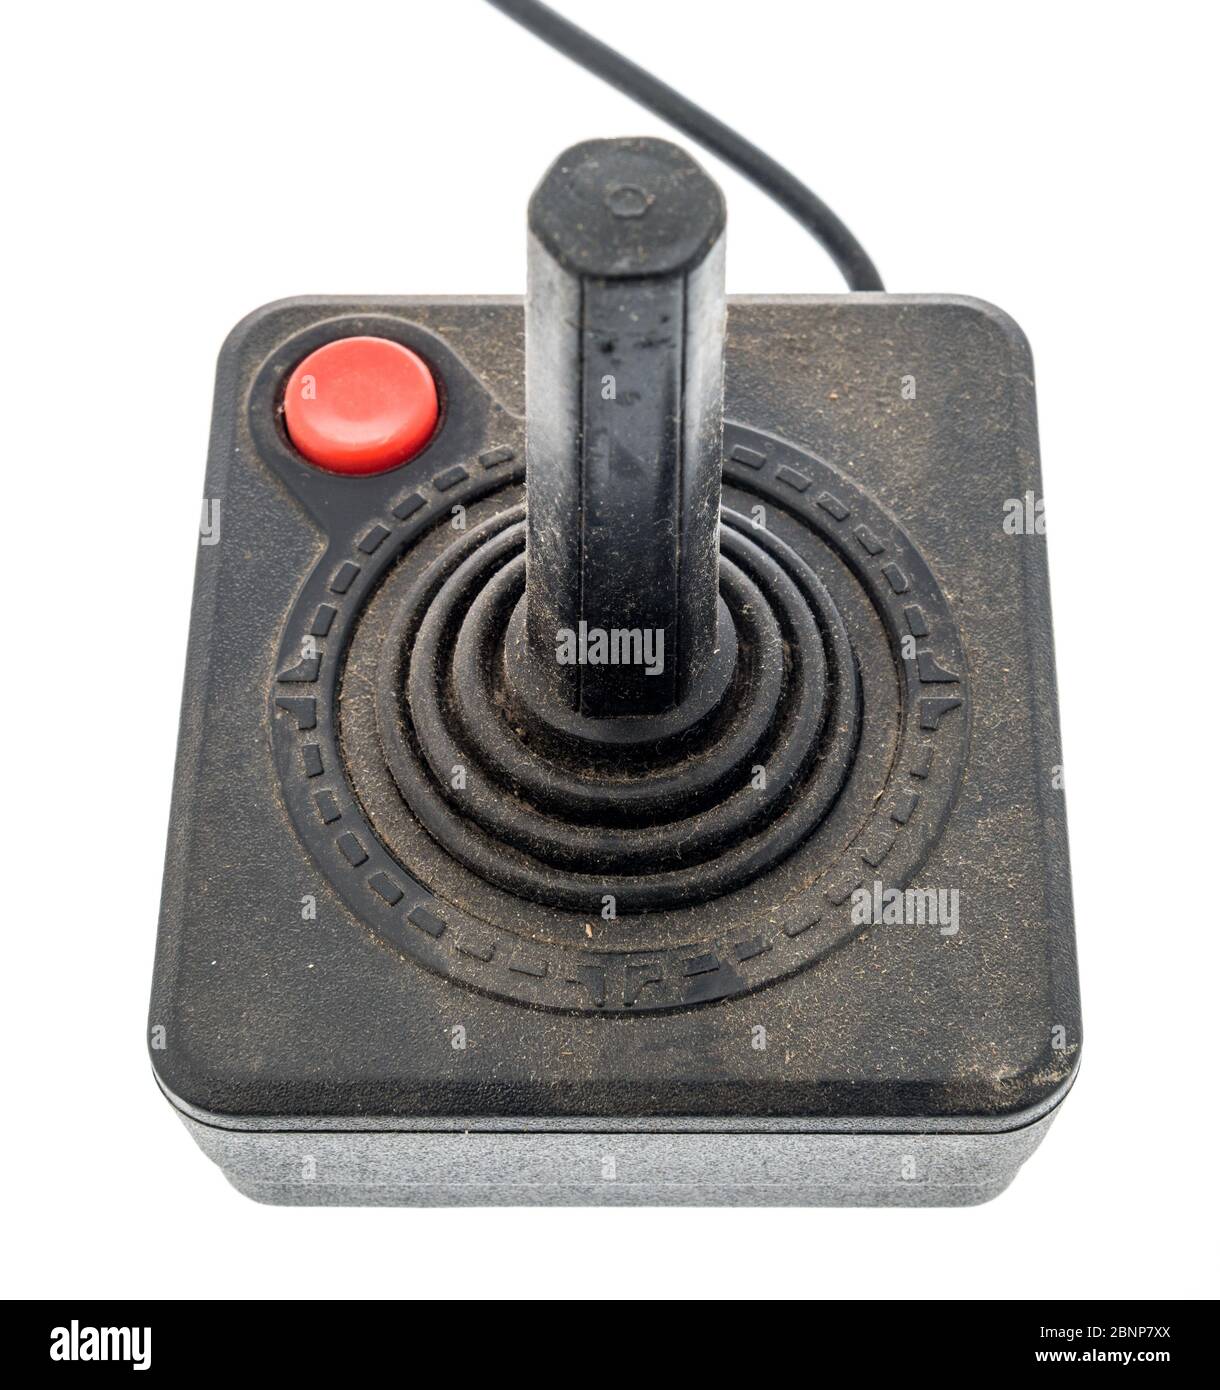 Winneconne,  WI - 5 May 2020:  A package of Atari 2600 joystick controller covered with dust on an isolated background Stock Photo